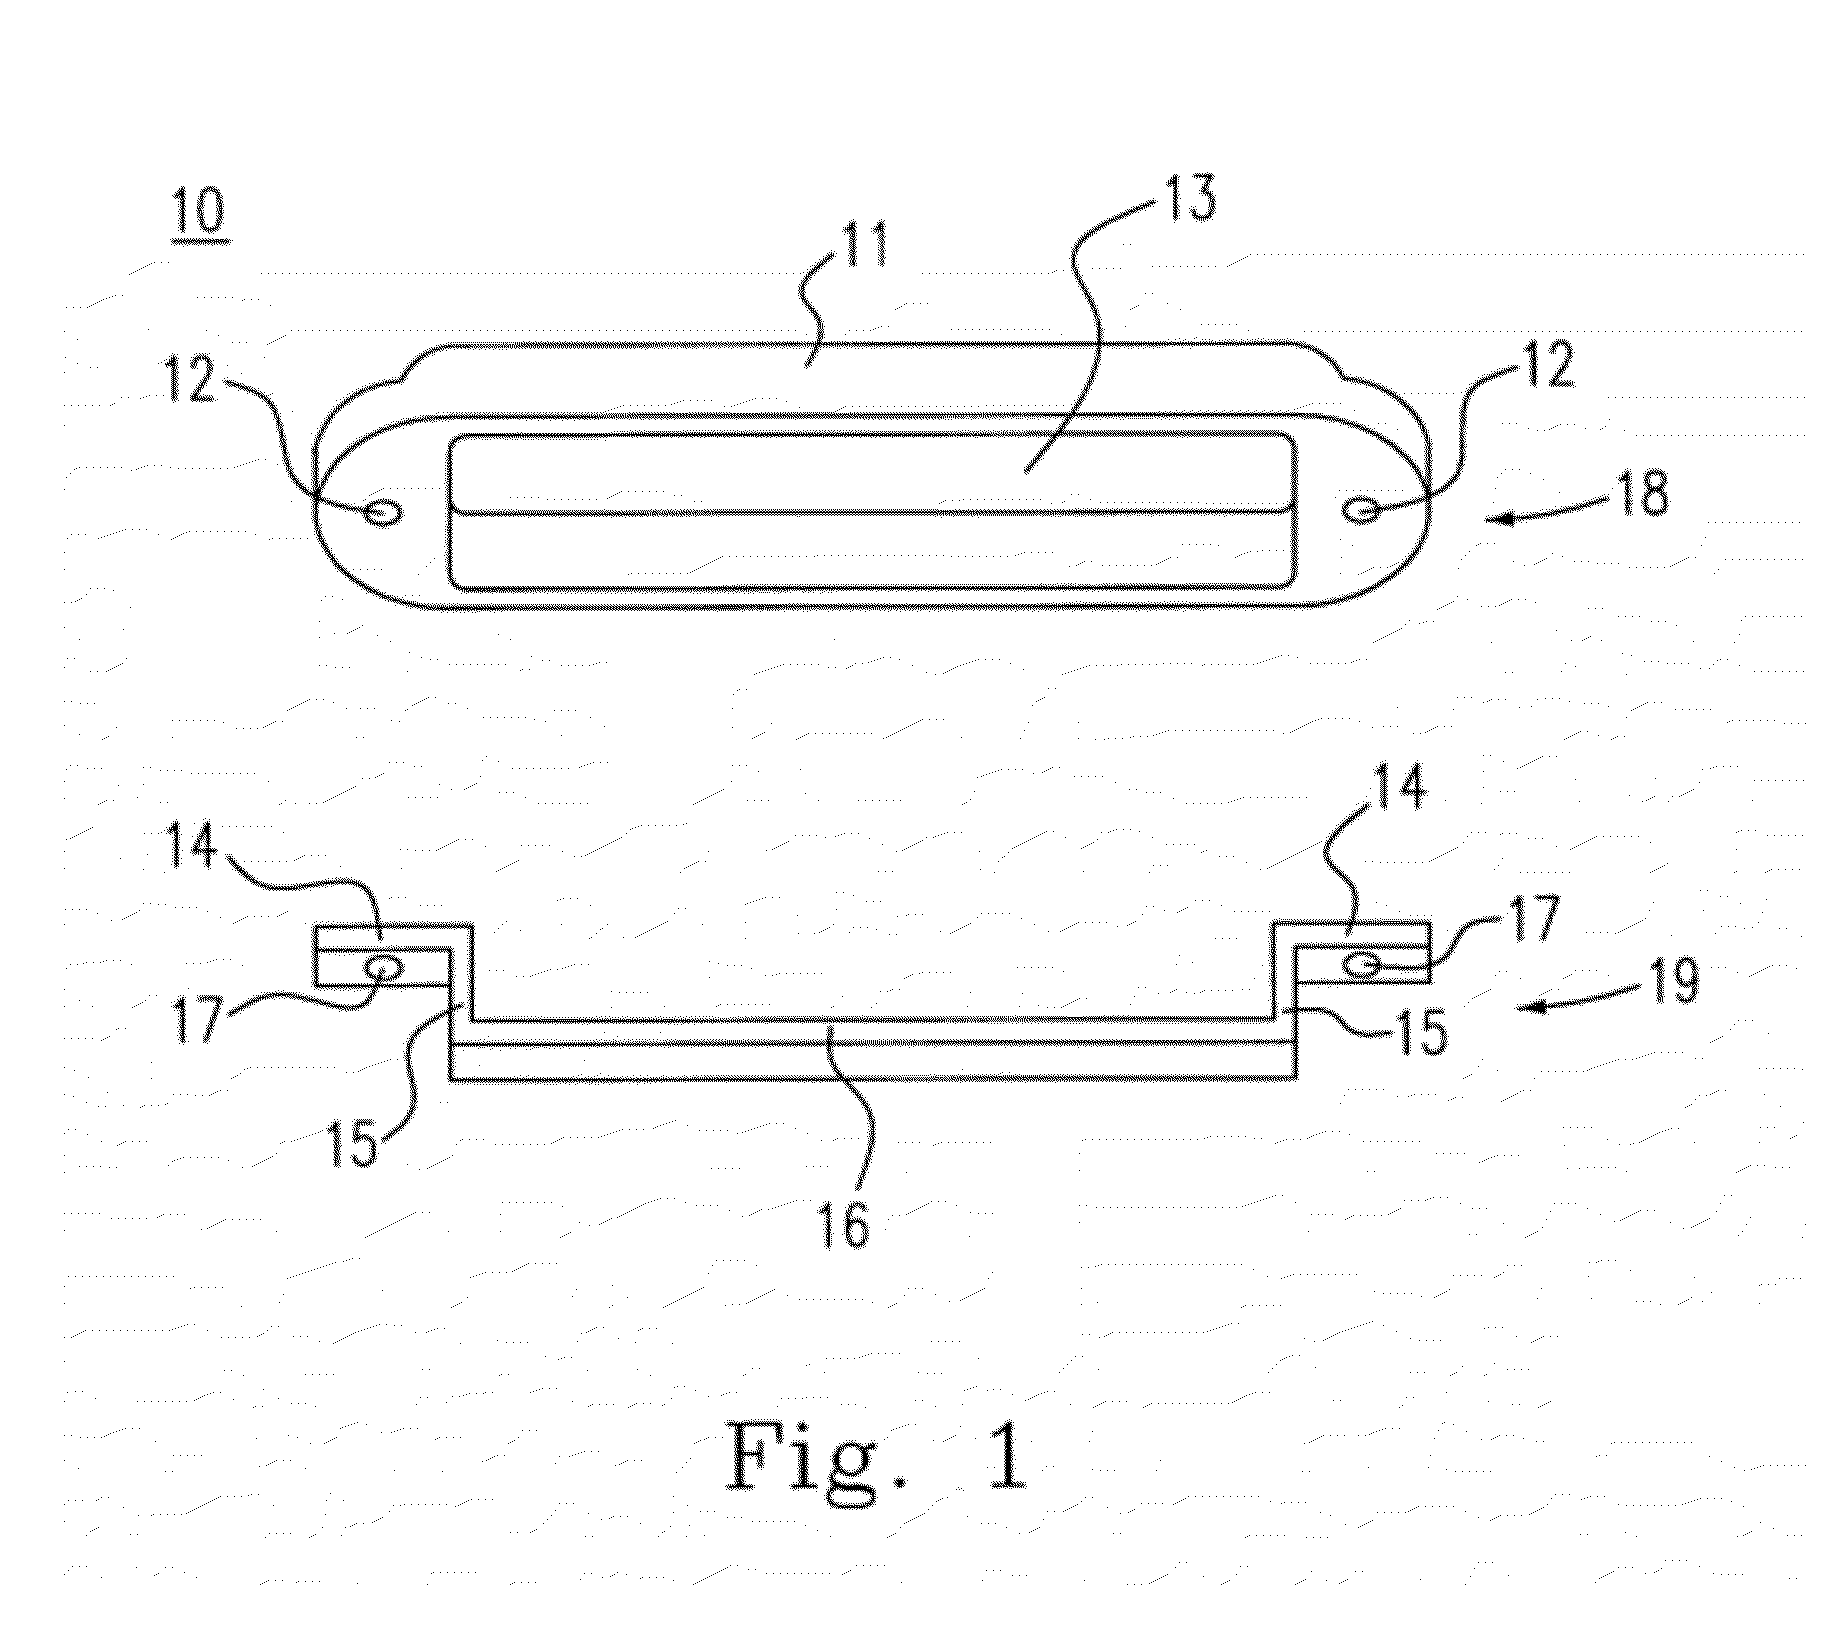 Apparatus for removal of docking plate in semiconductor equipment